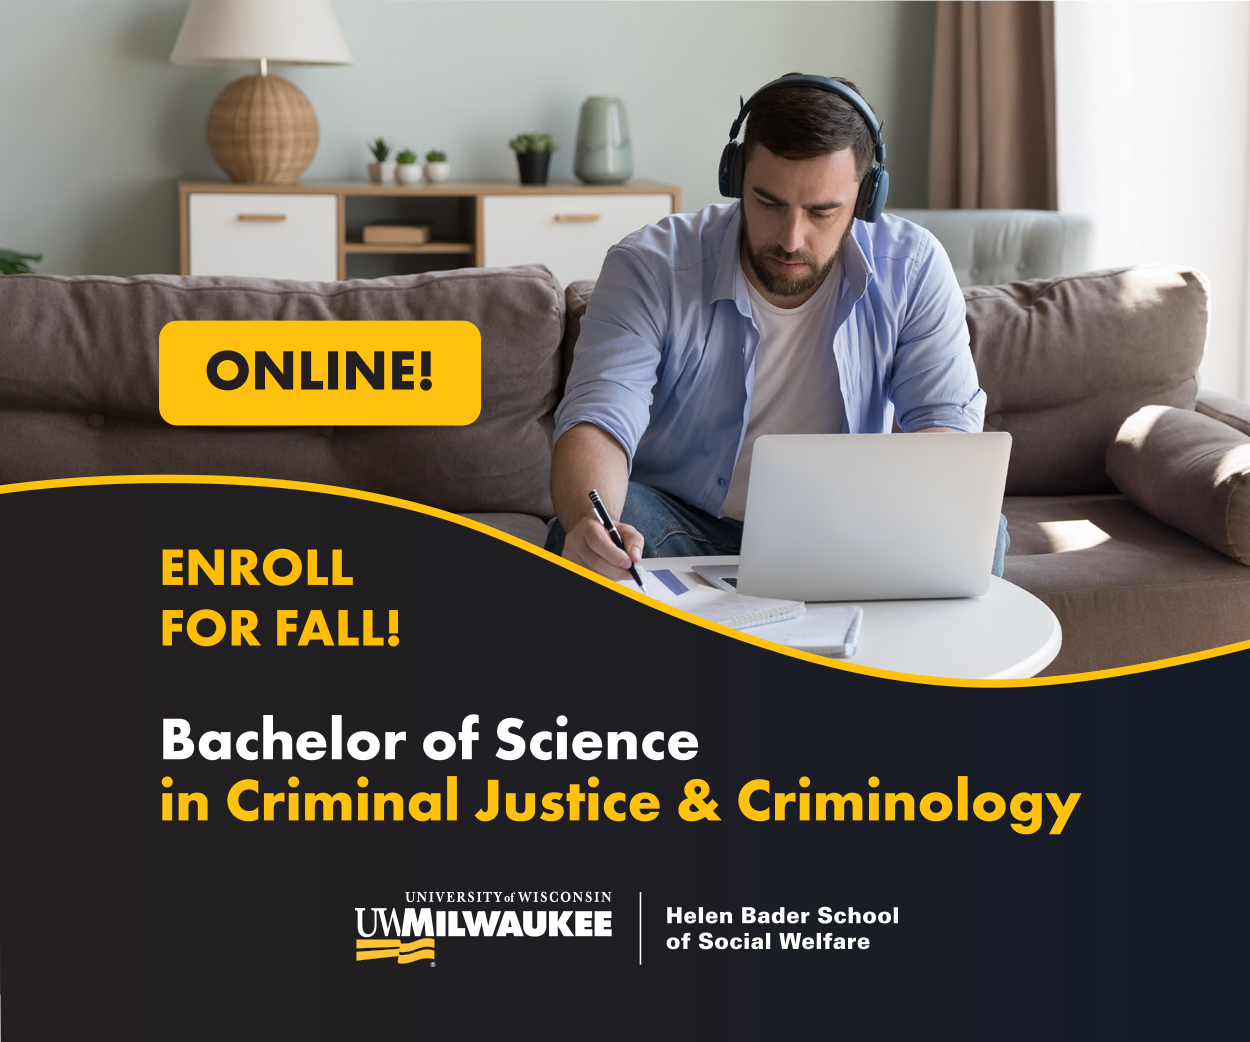 UWM Bachelor of Science in Criminal Justice and Criminology